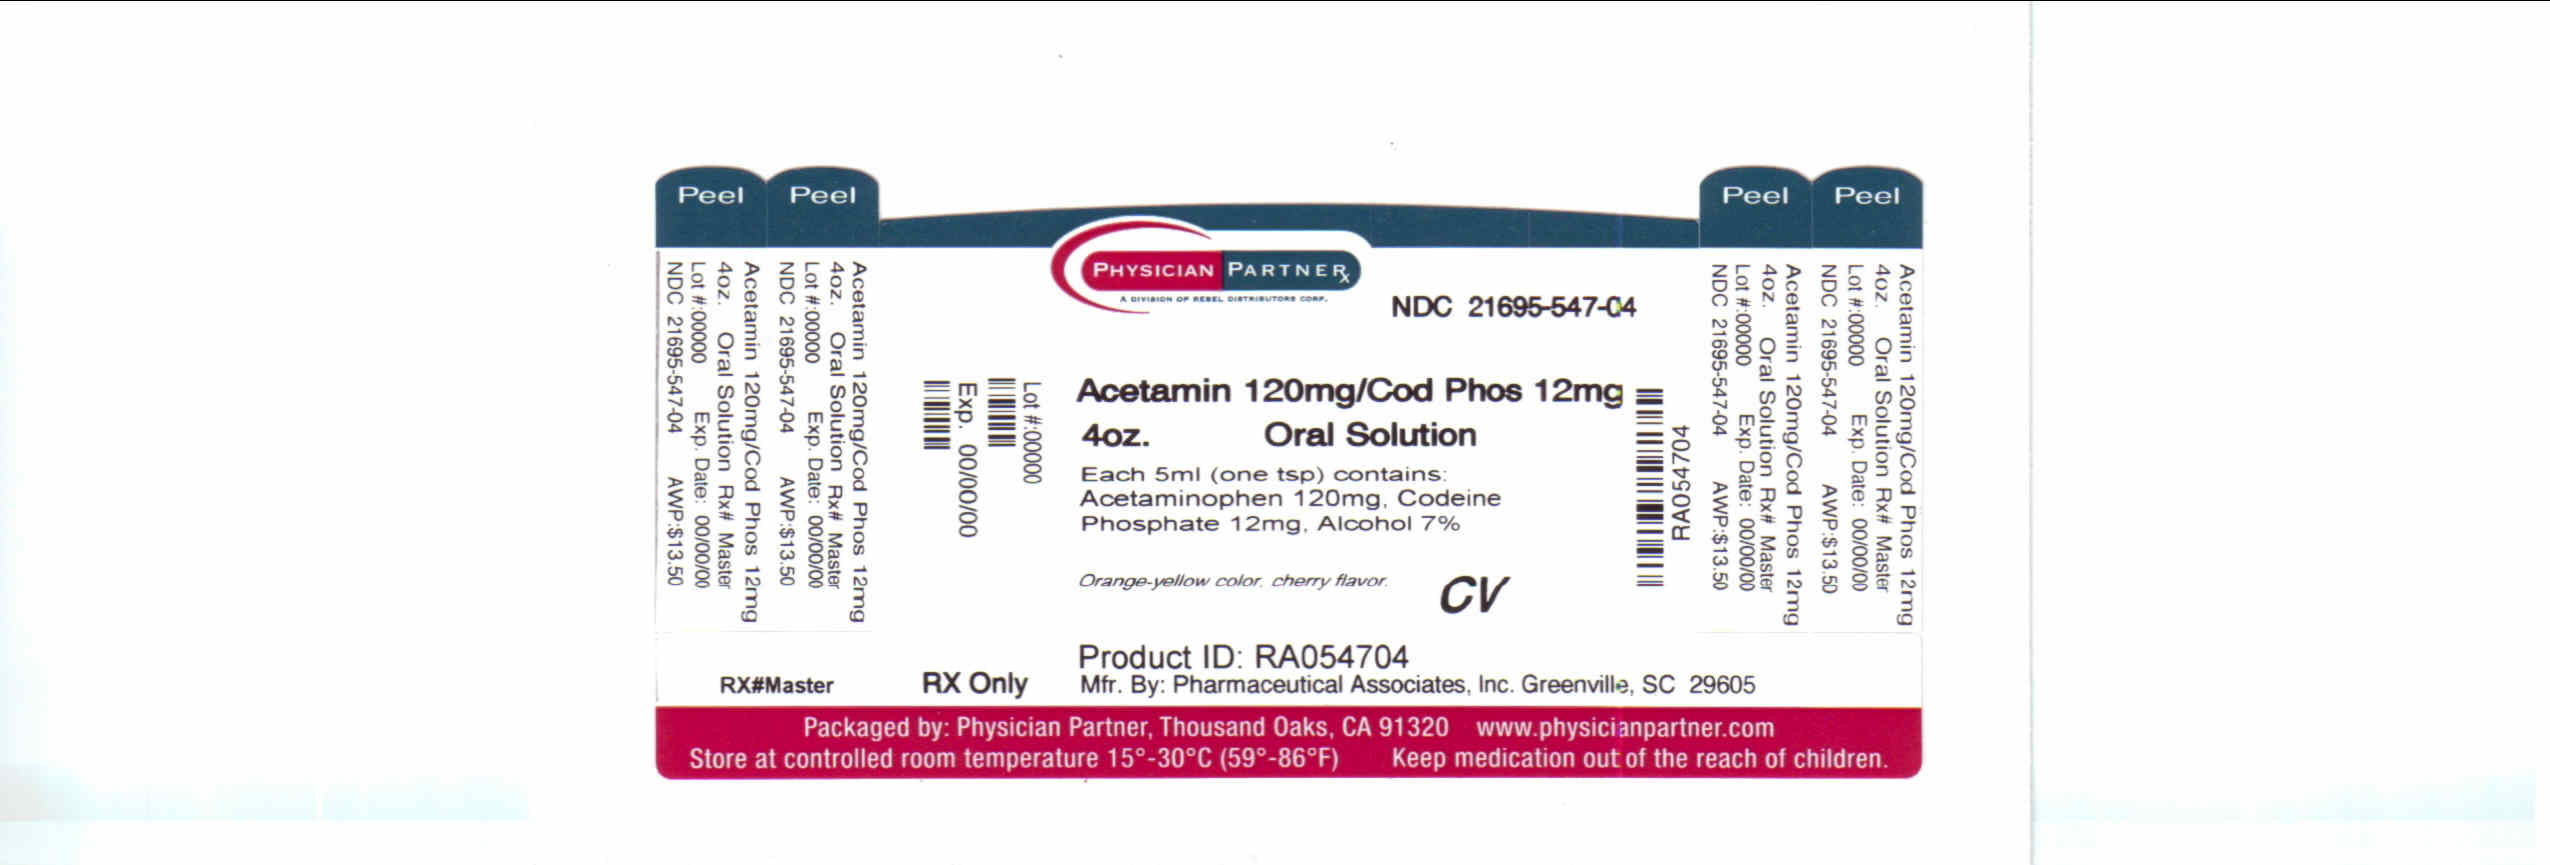 Acetaminophen And Codeine Phosphate Solution Information, Side Effects